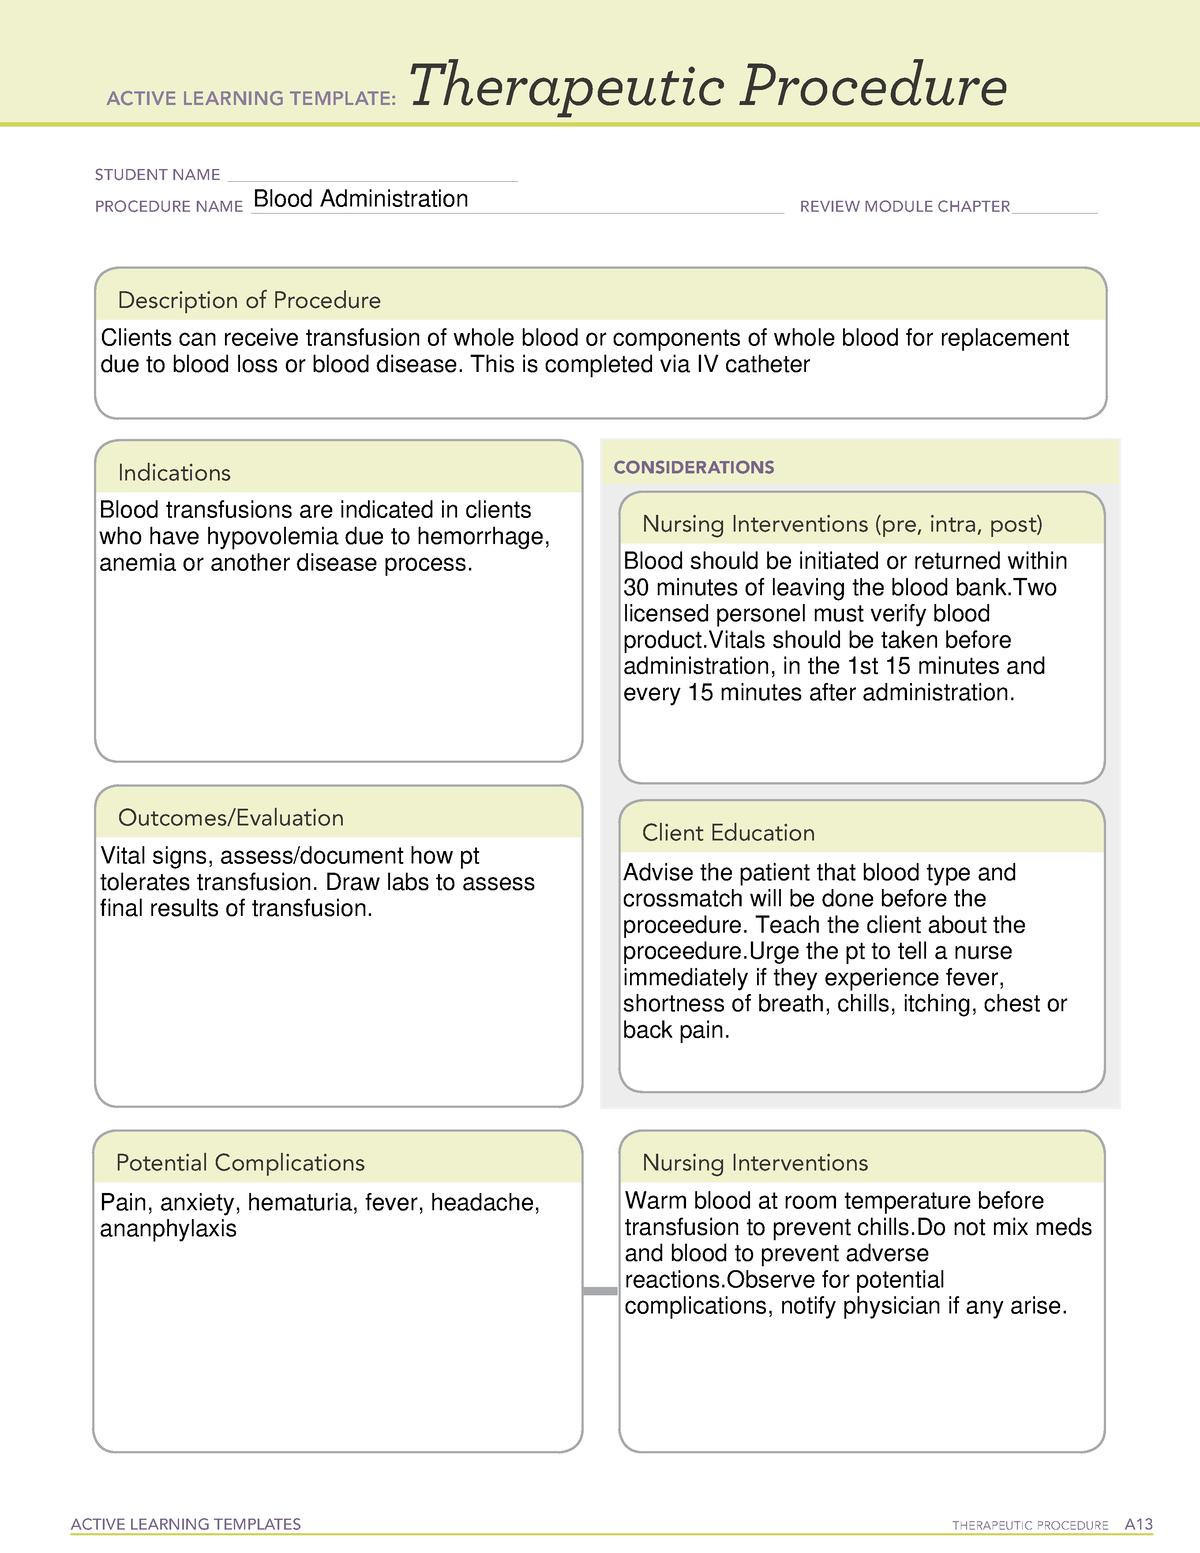 active-learning-template-therapeutic-procedure-form-active-learning-templates-therapeutic